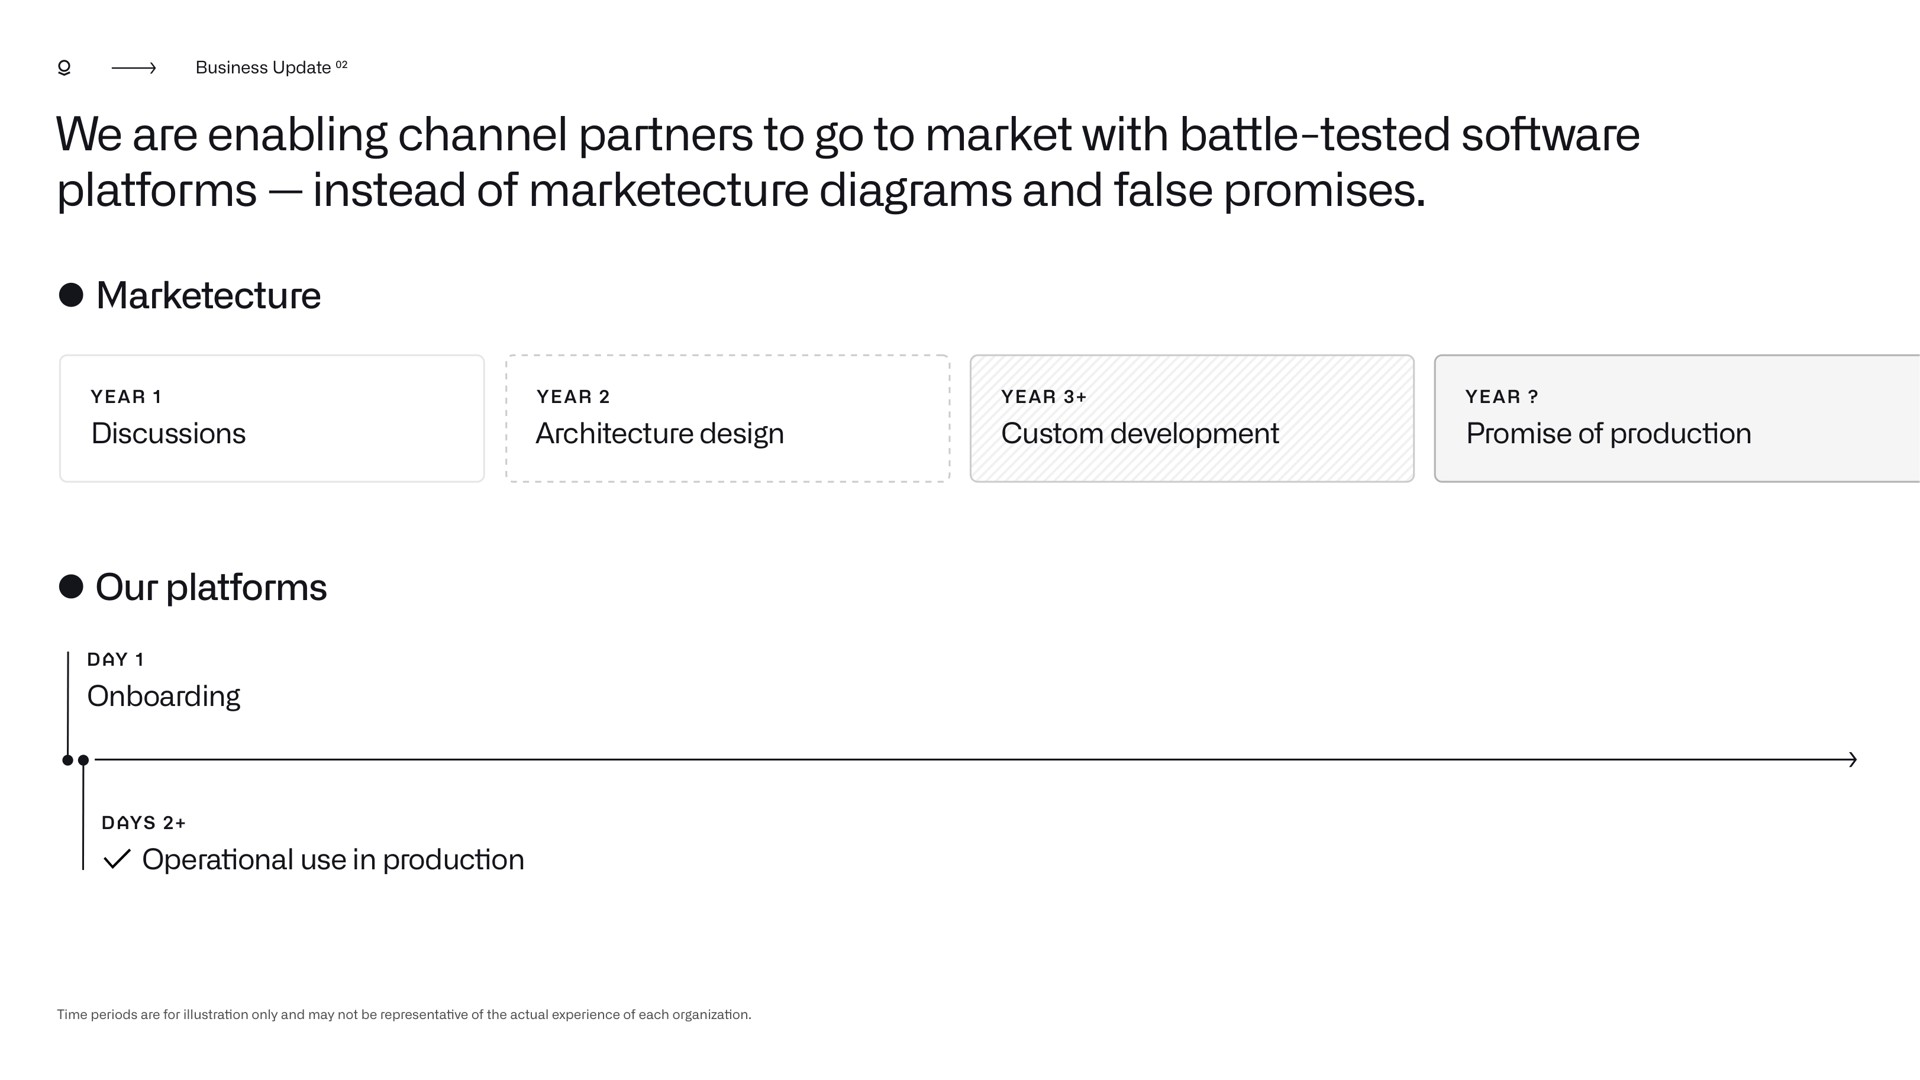 we are enabling channel partners to go to market with battle tested platforms instead of diagrams and false promises our platforms | Palantir